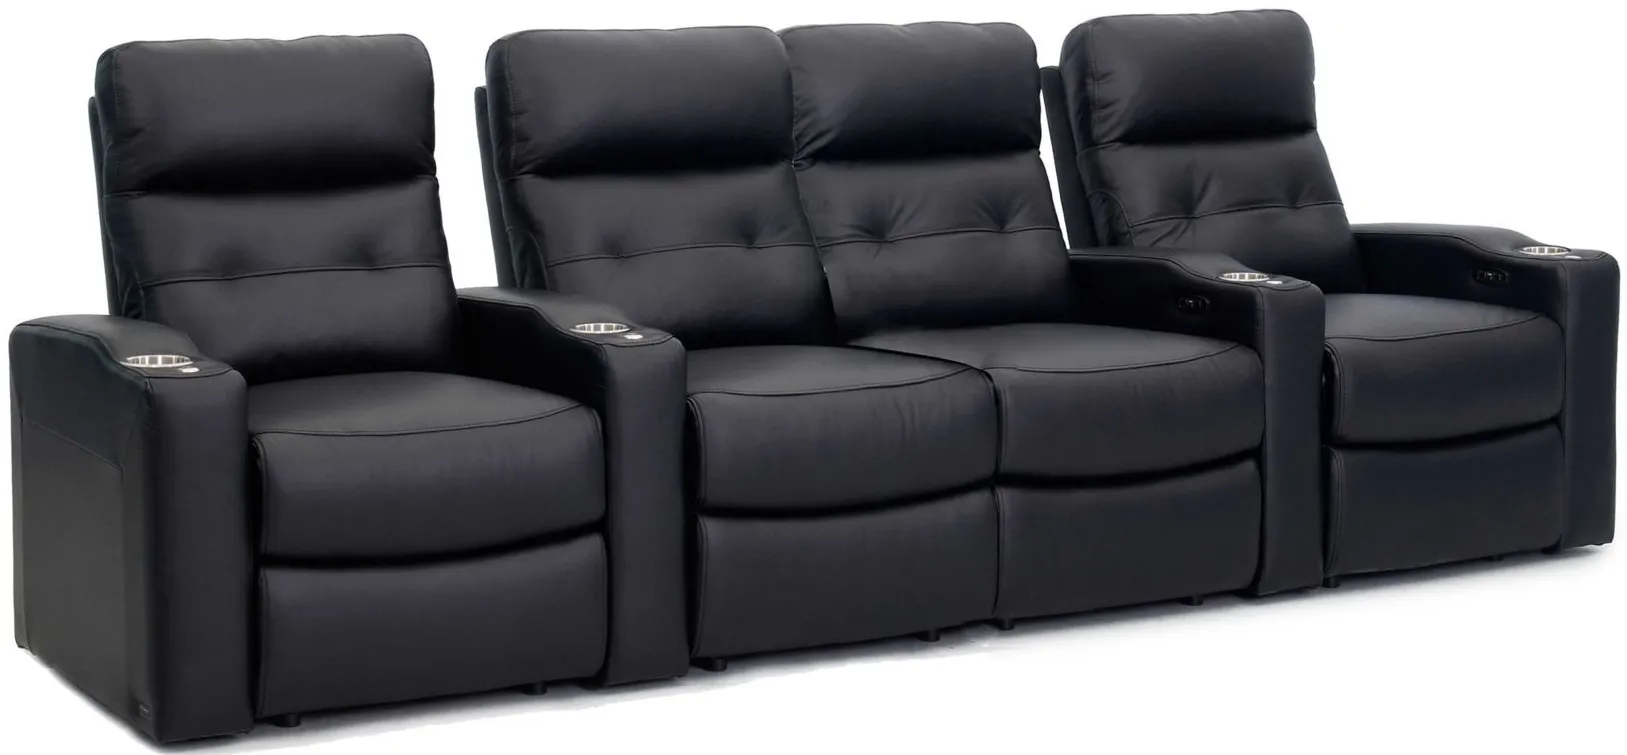 Century Leather 4-pc. Power-Reclining Sectional Sofa in Black by Bellanest